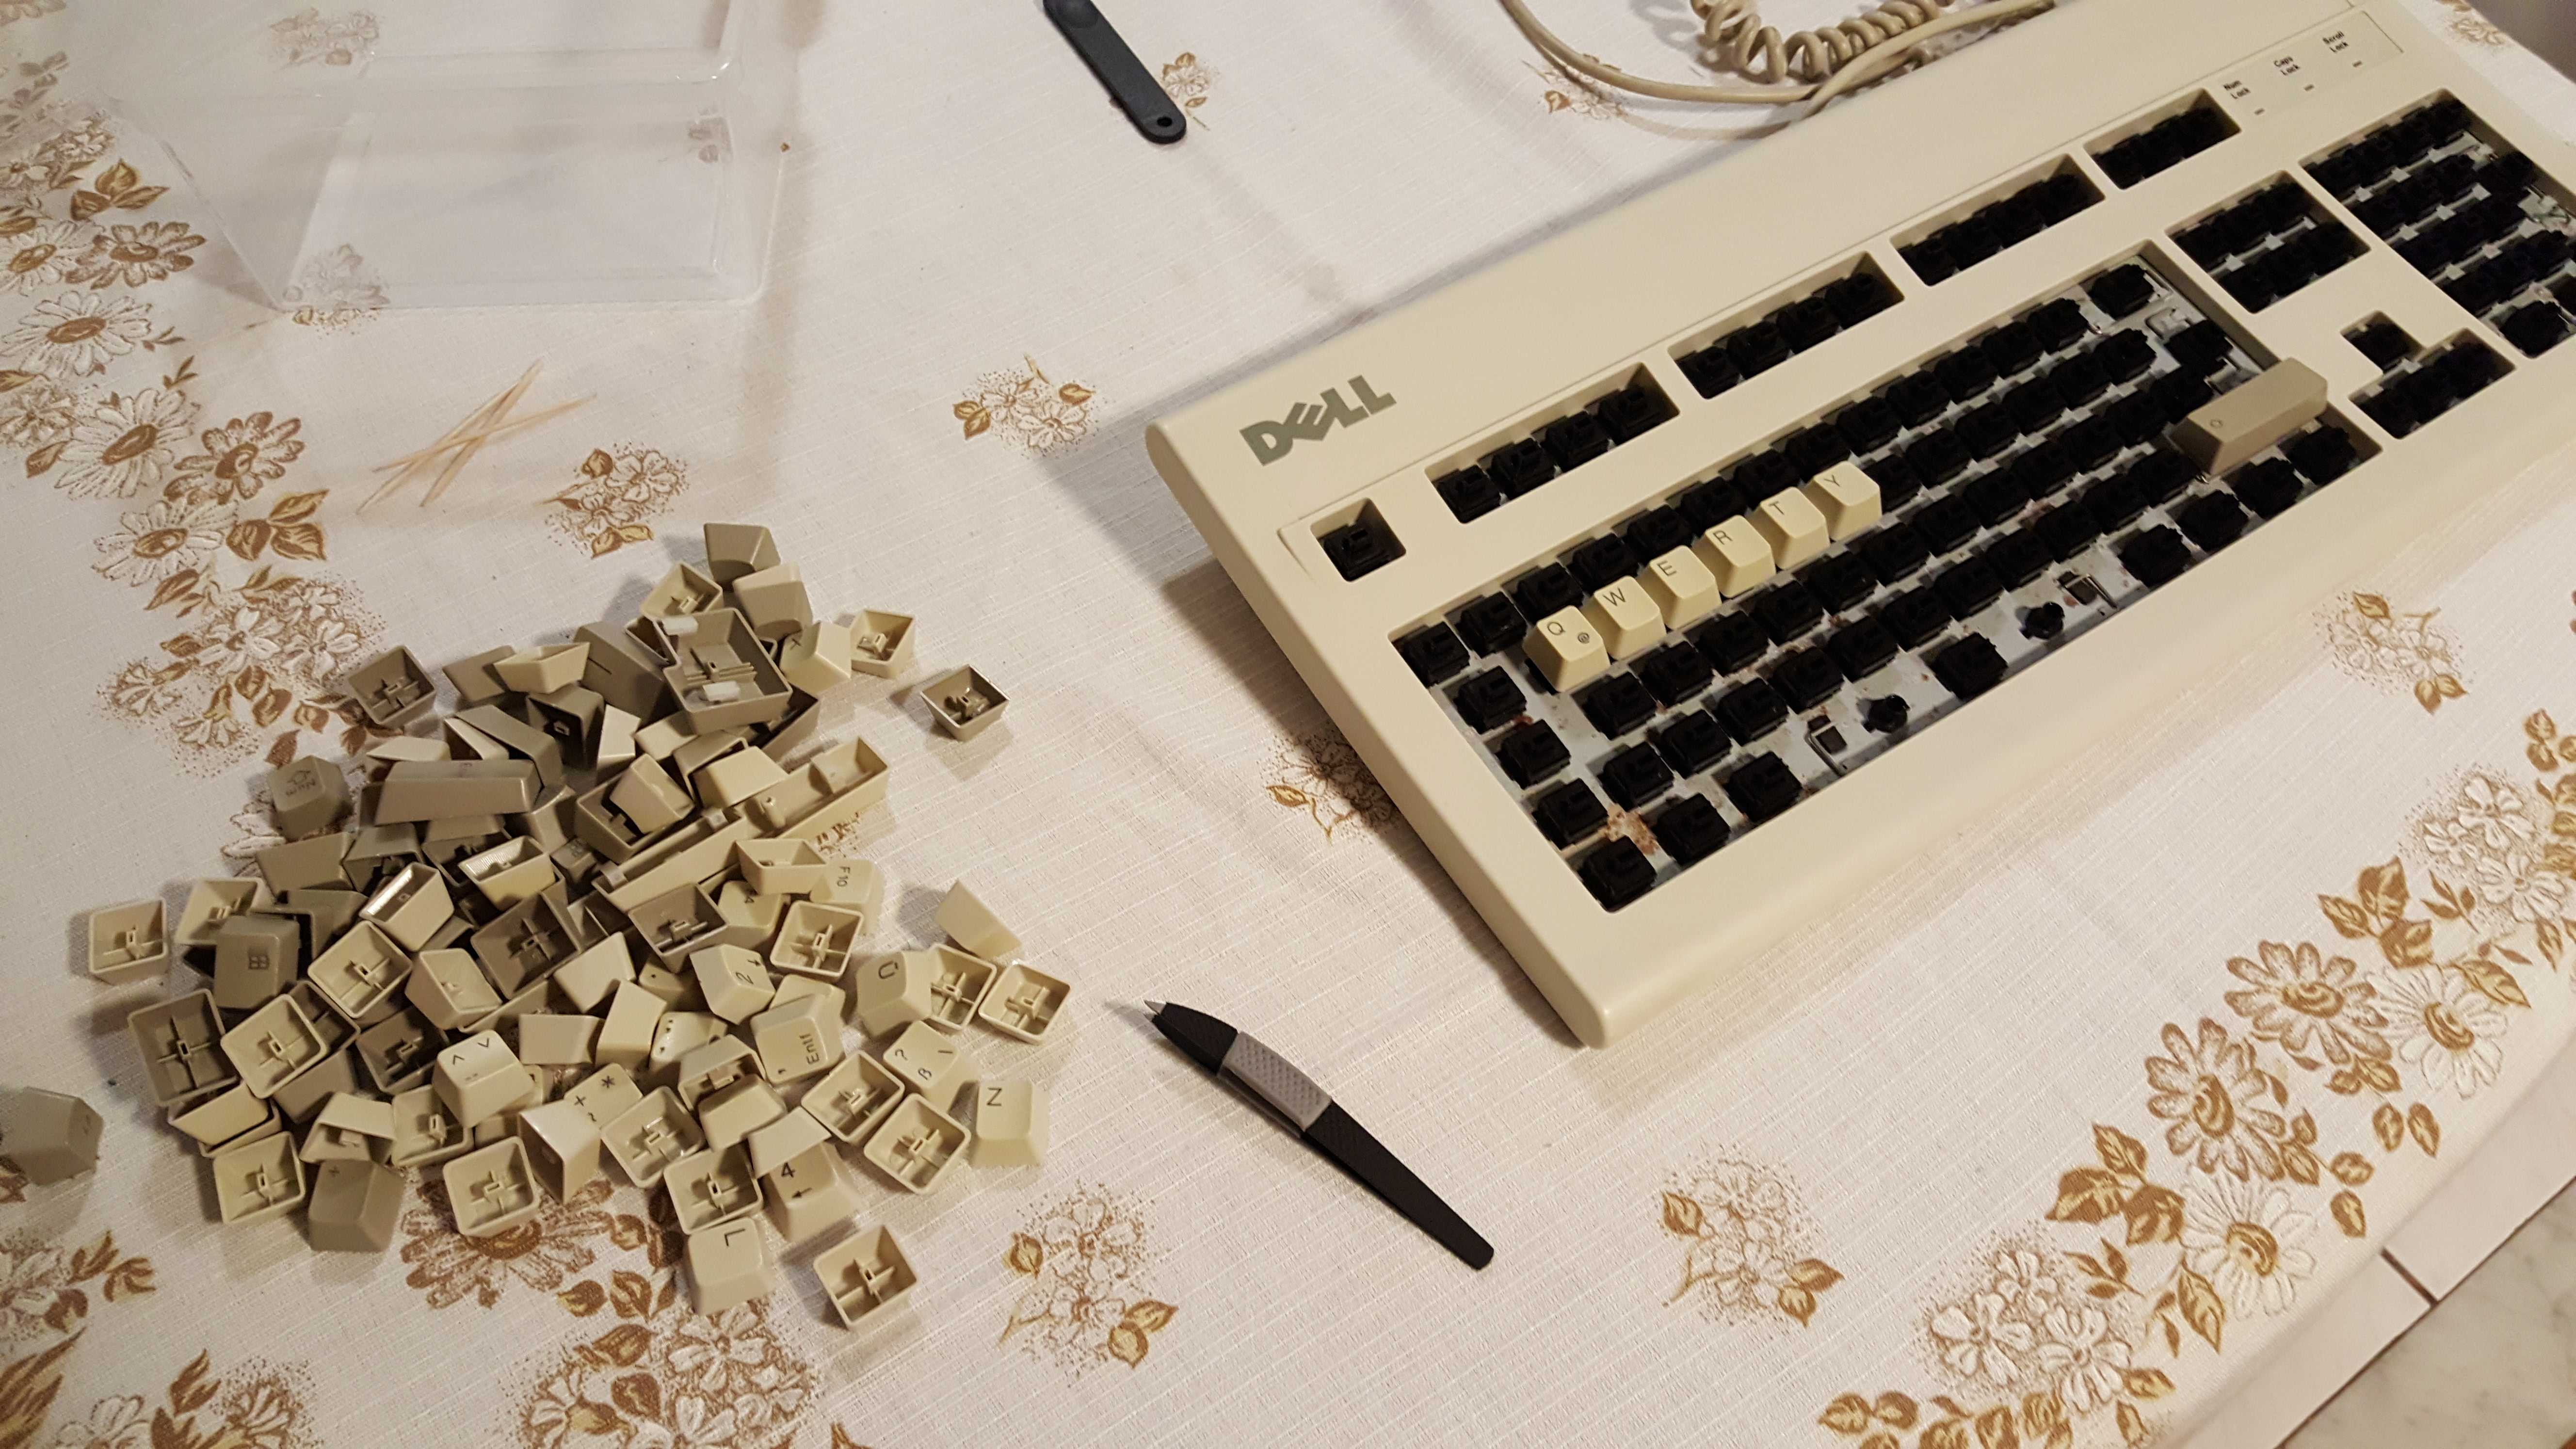 Puttin' the ol' girl back together again. Tried to make her a Qwerty, but she set me straight again. Can't make her into something she's not, gotta let her be man! Well, apart from the tactile leaves - them's the exception to the rule...